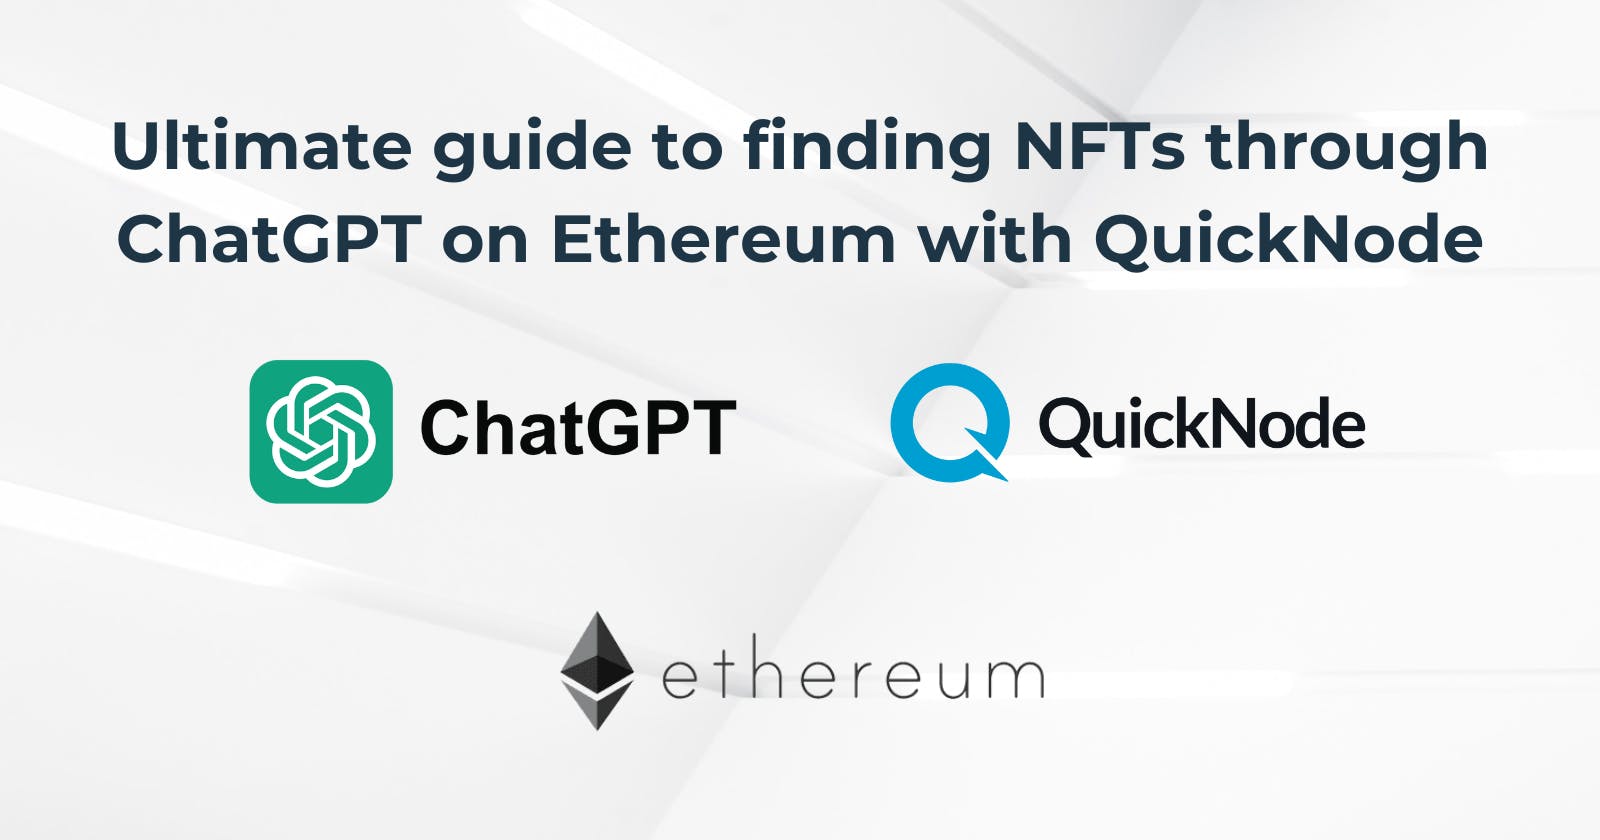 Ultimate guide to finding NFTs through ChatGPT on Ethereum with QuickNode